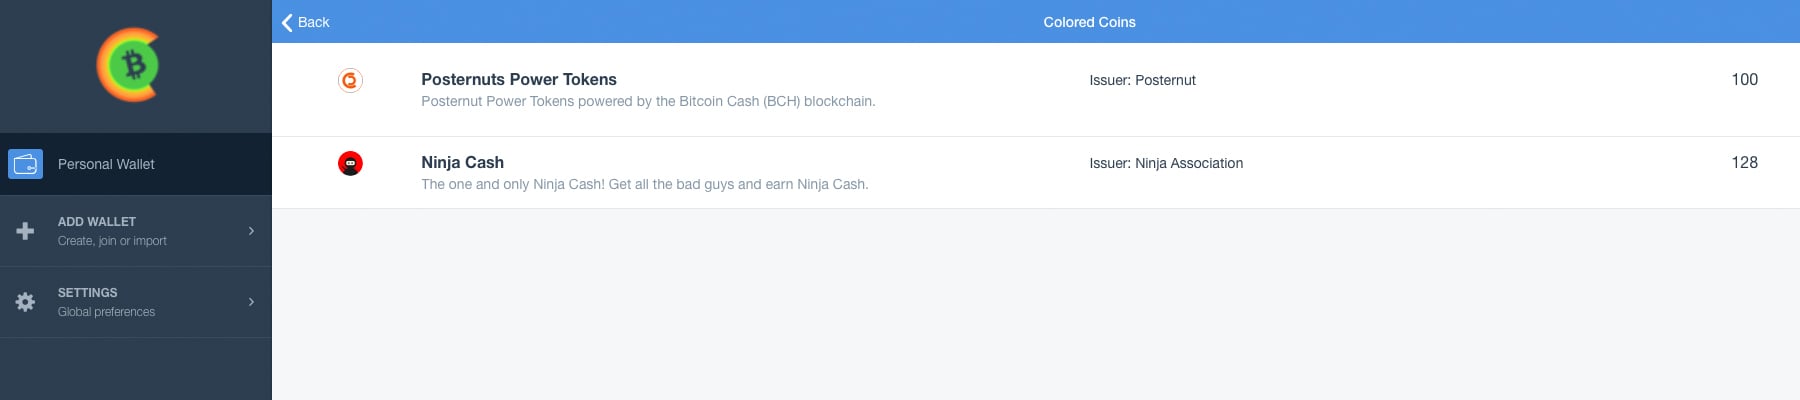 A BCH-Fueled Colored Coins Desktop Wallet Launches